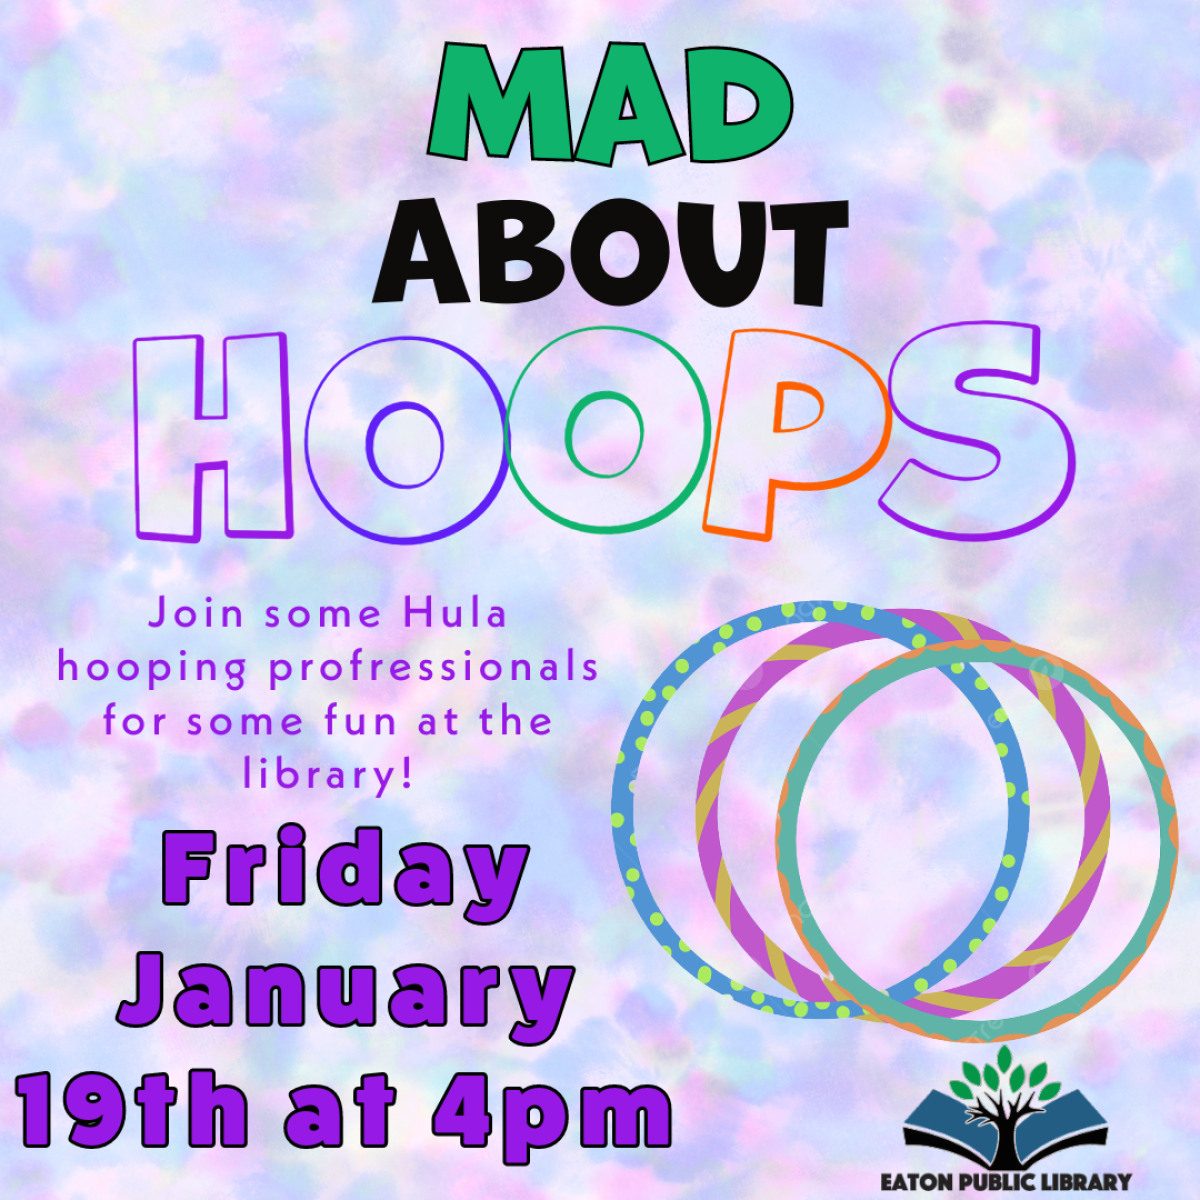 Mad about hoops!